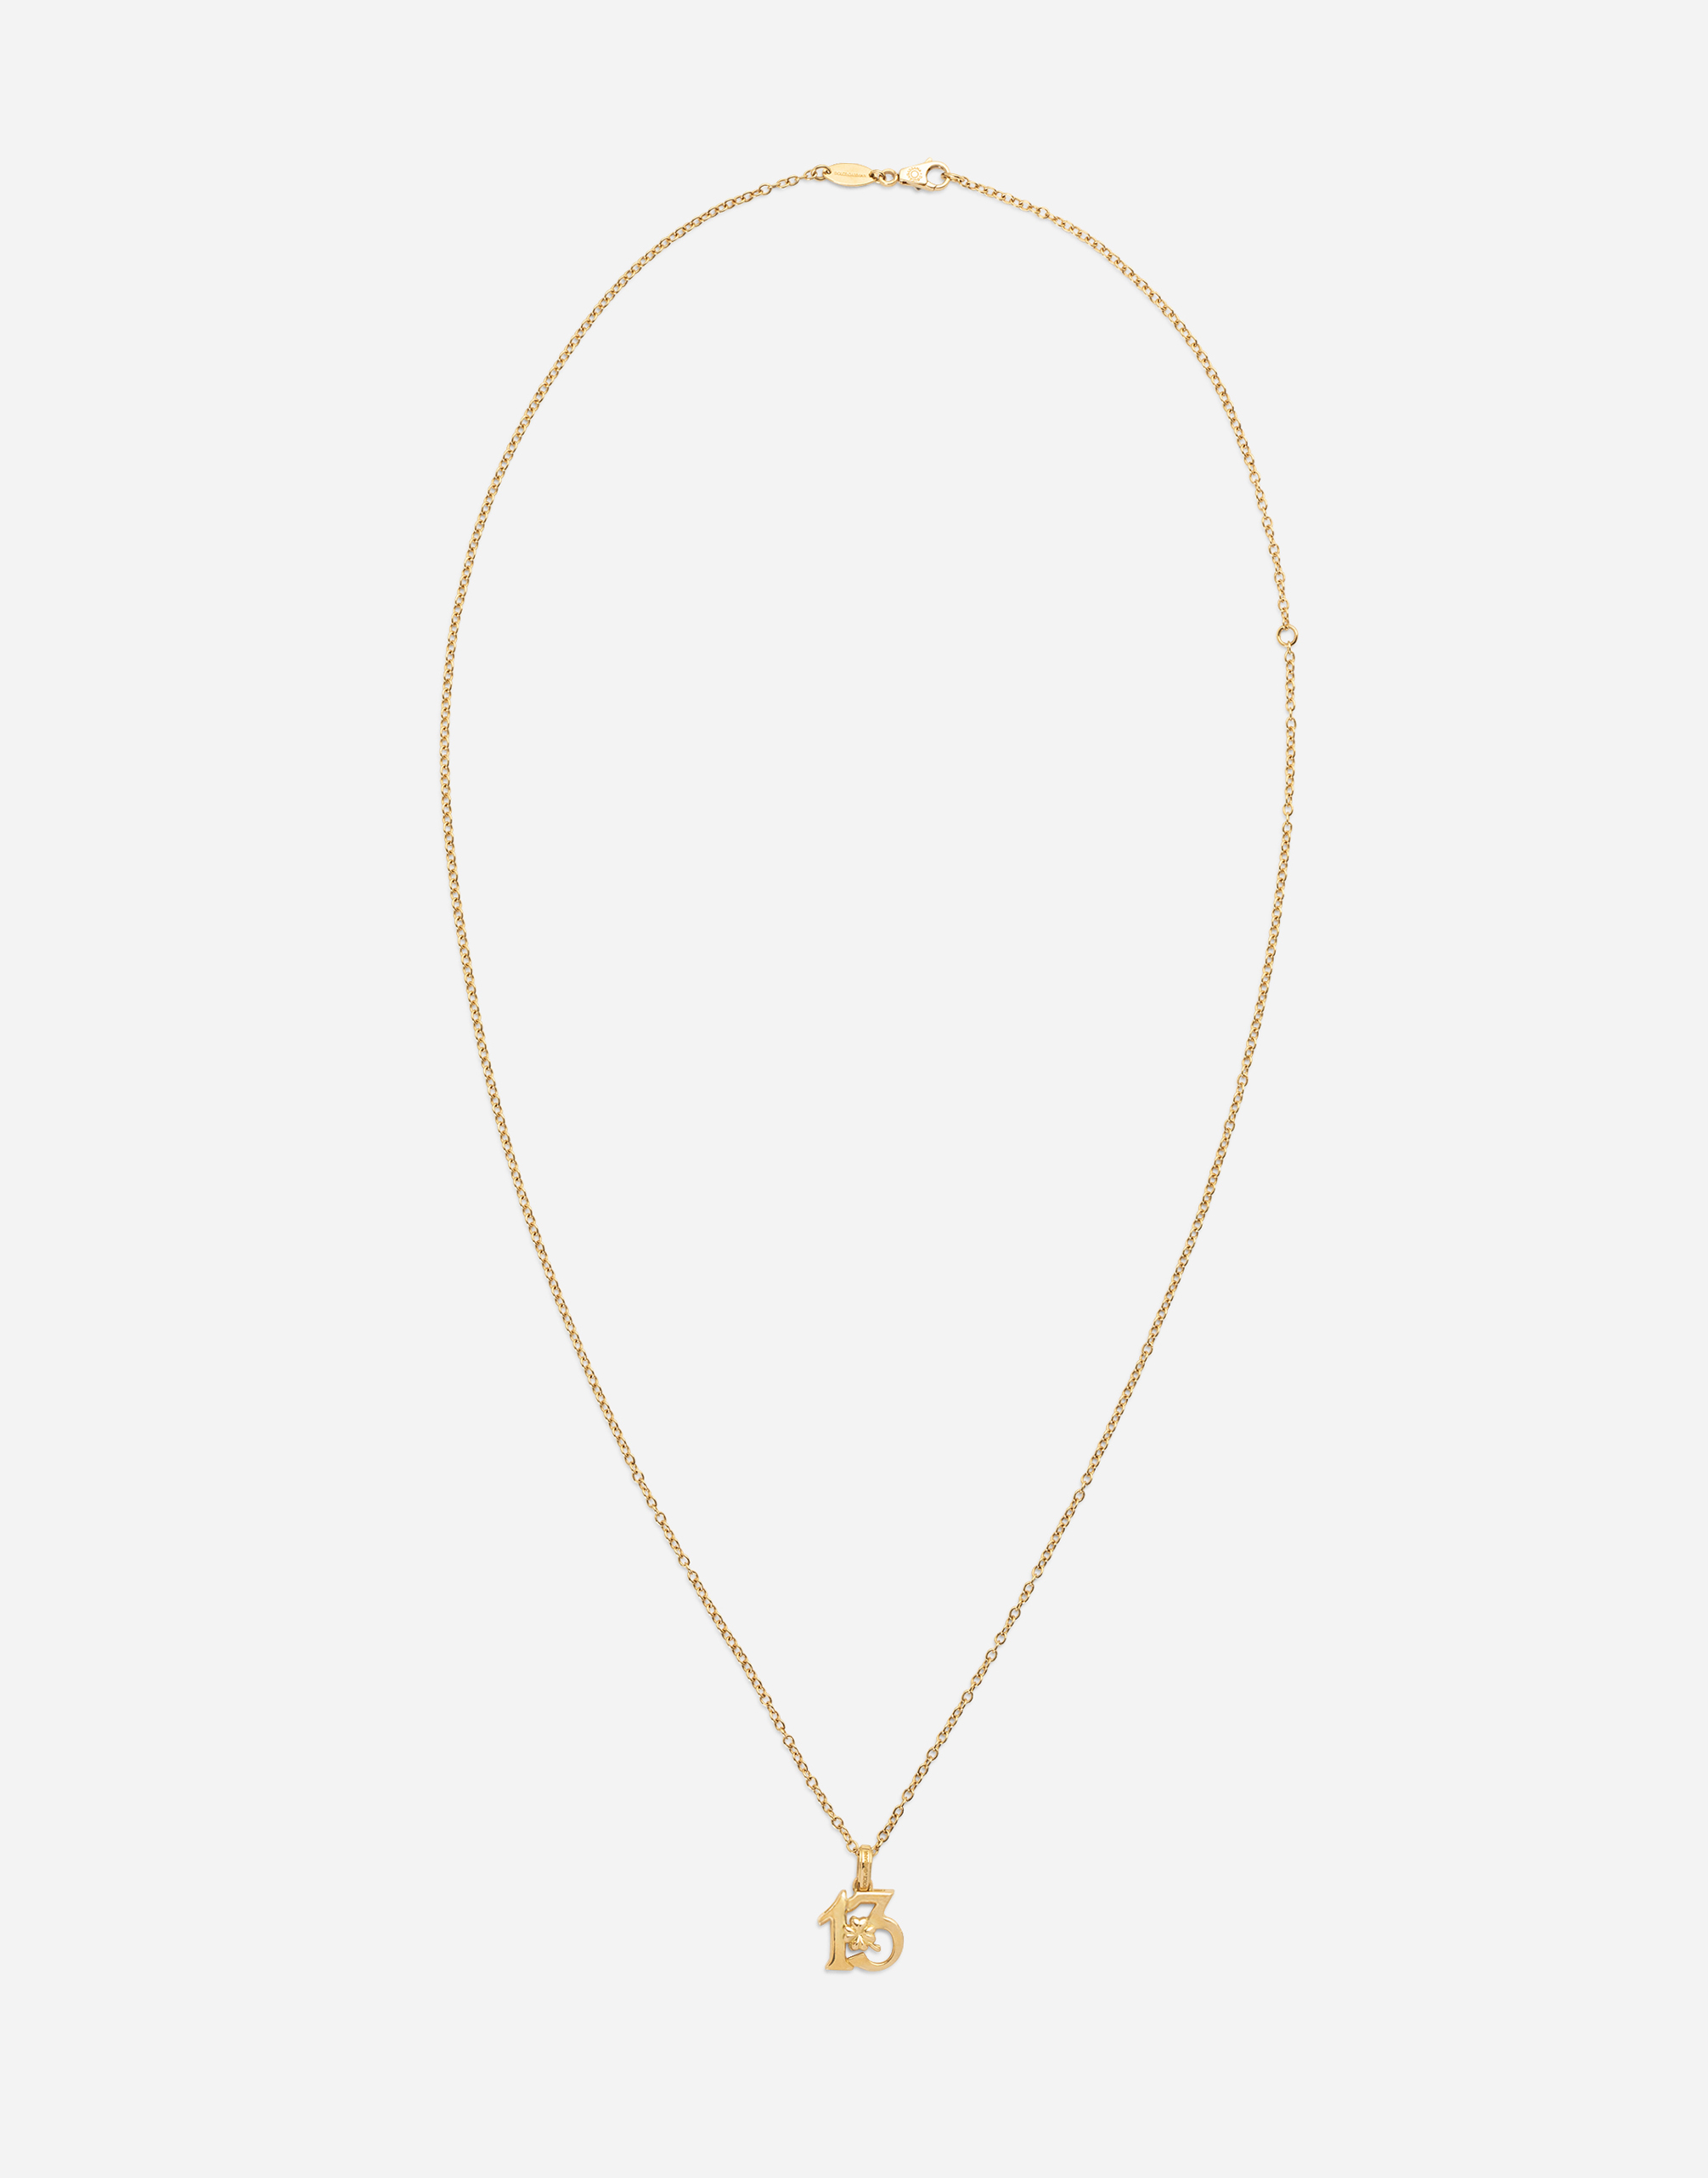 Dolce & Gabbana Good Luck Number 13 Pendant On Yellow Gold Chain